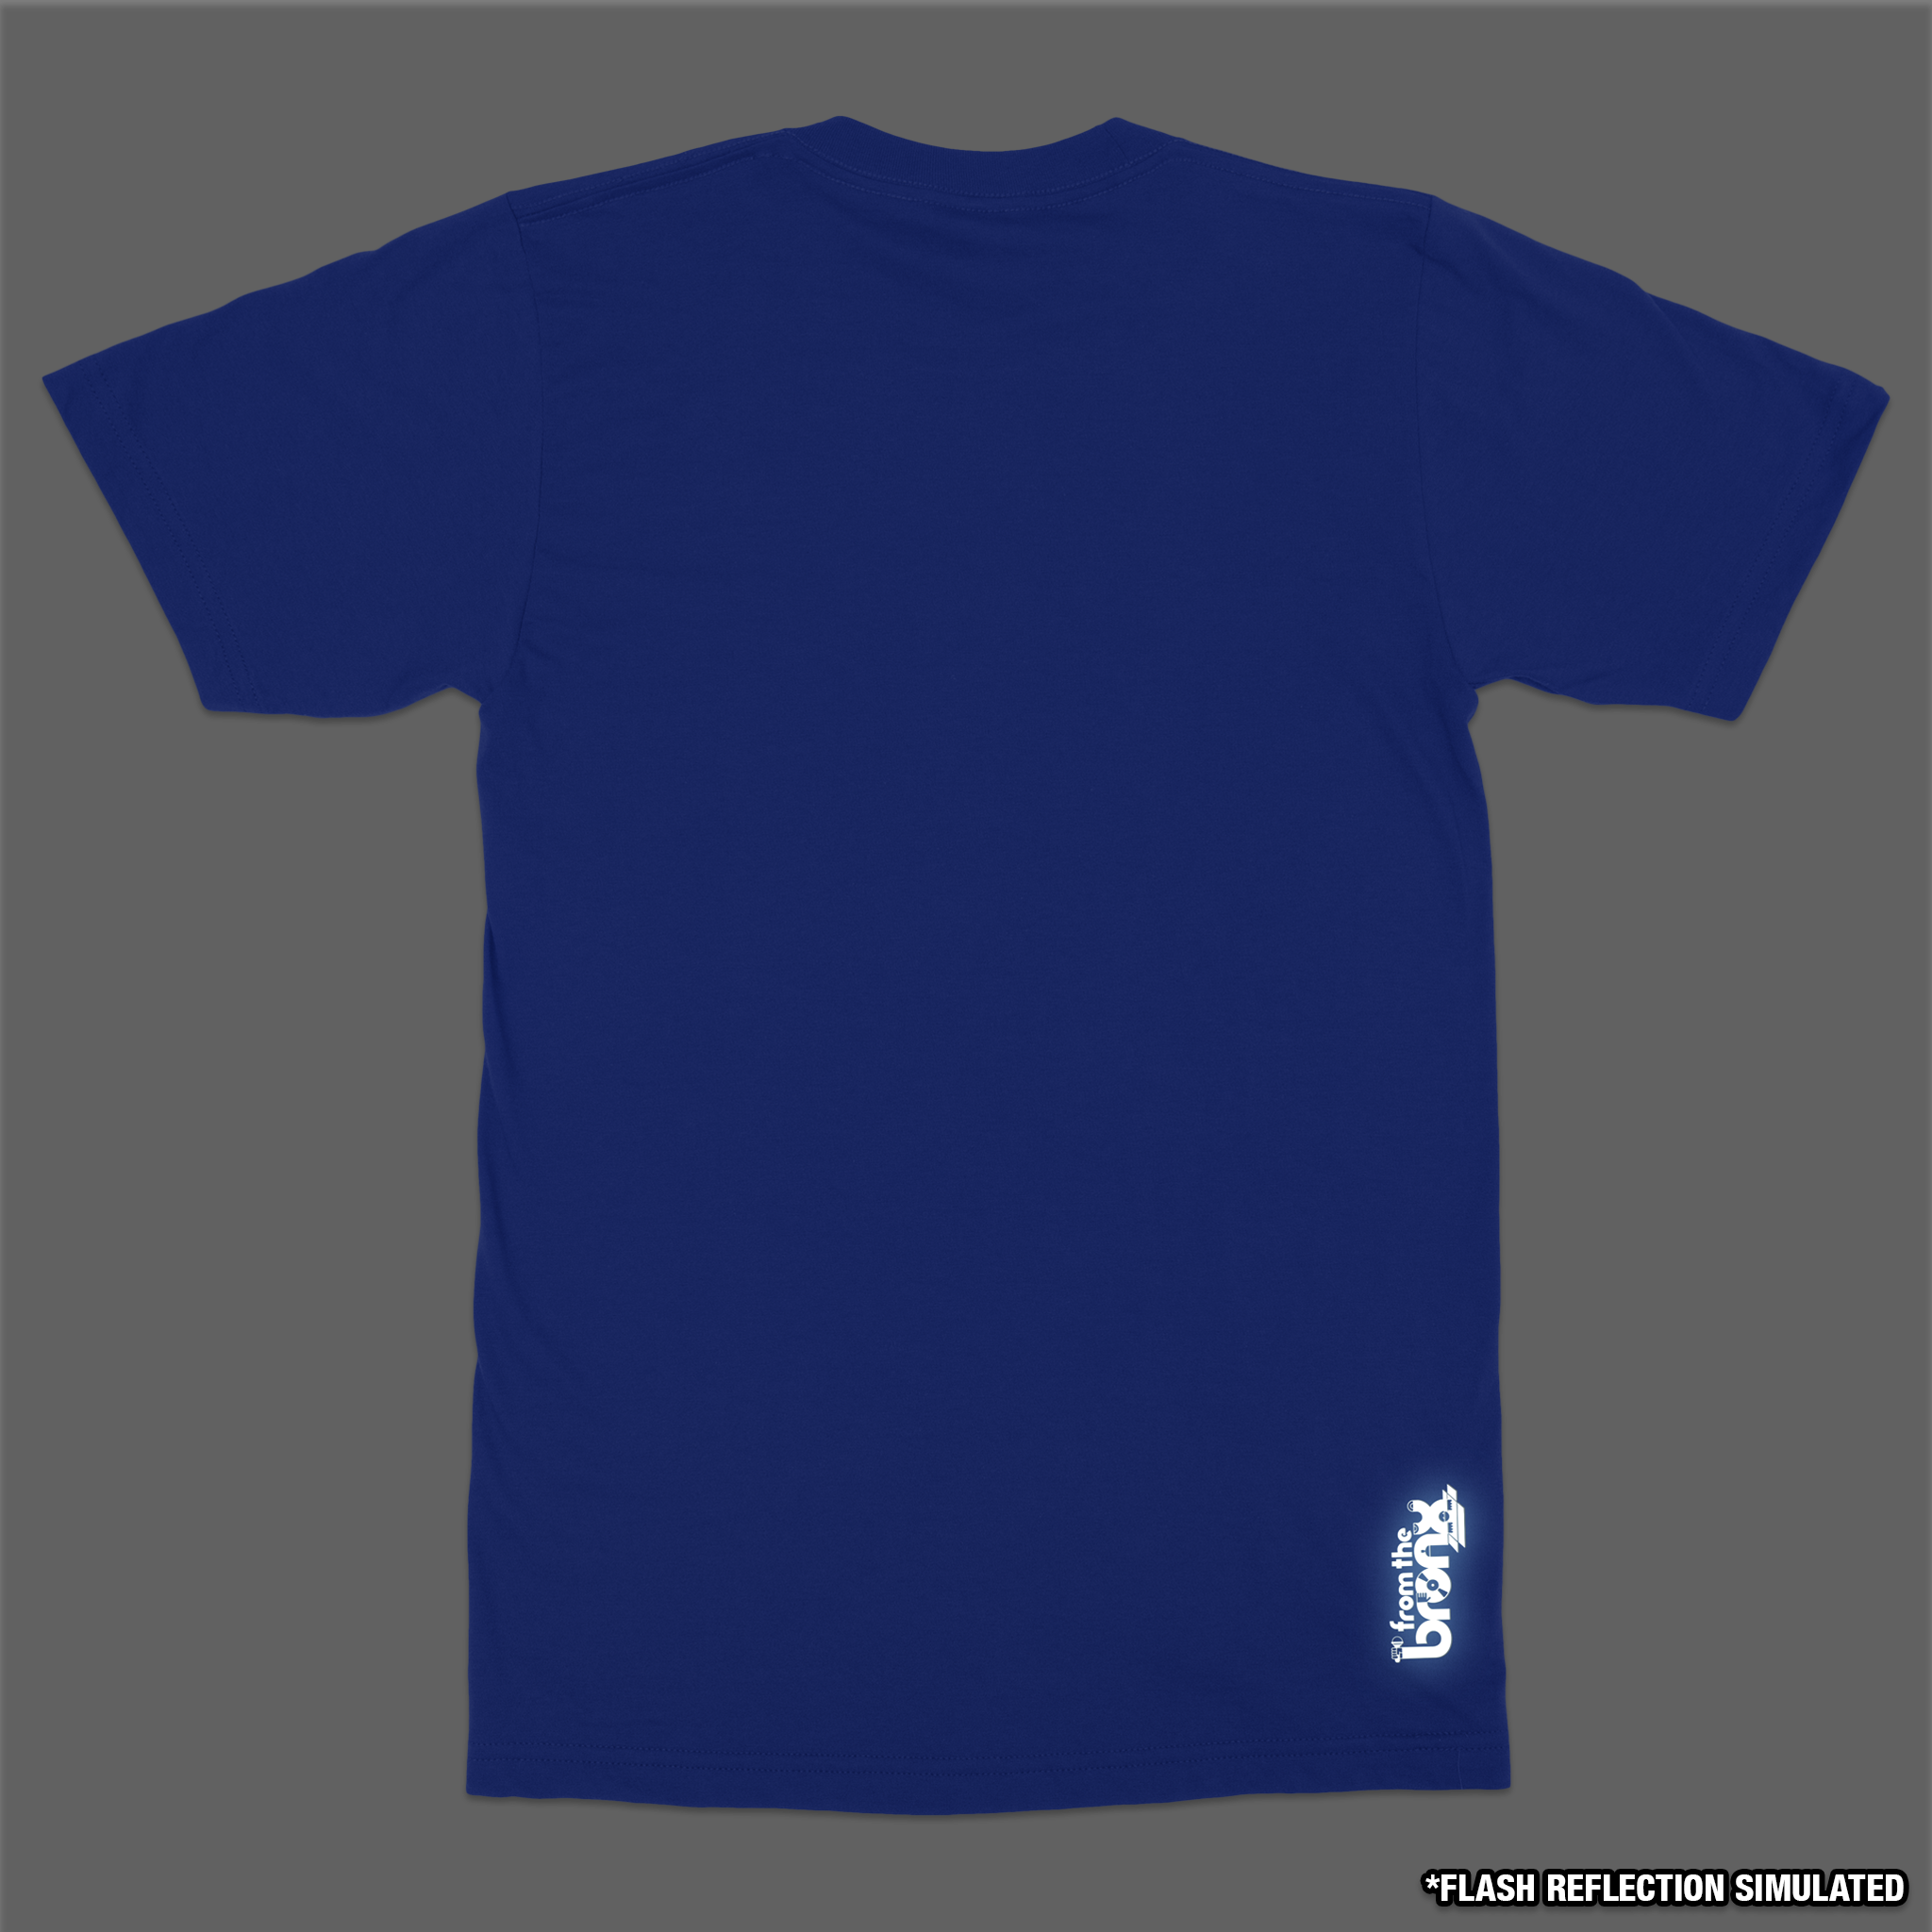 Boogie Down Bronx Reflective T-Shirt Back in Royal Blue with Simulated Reflection